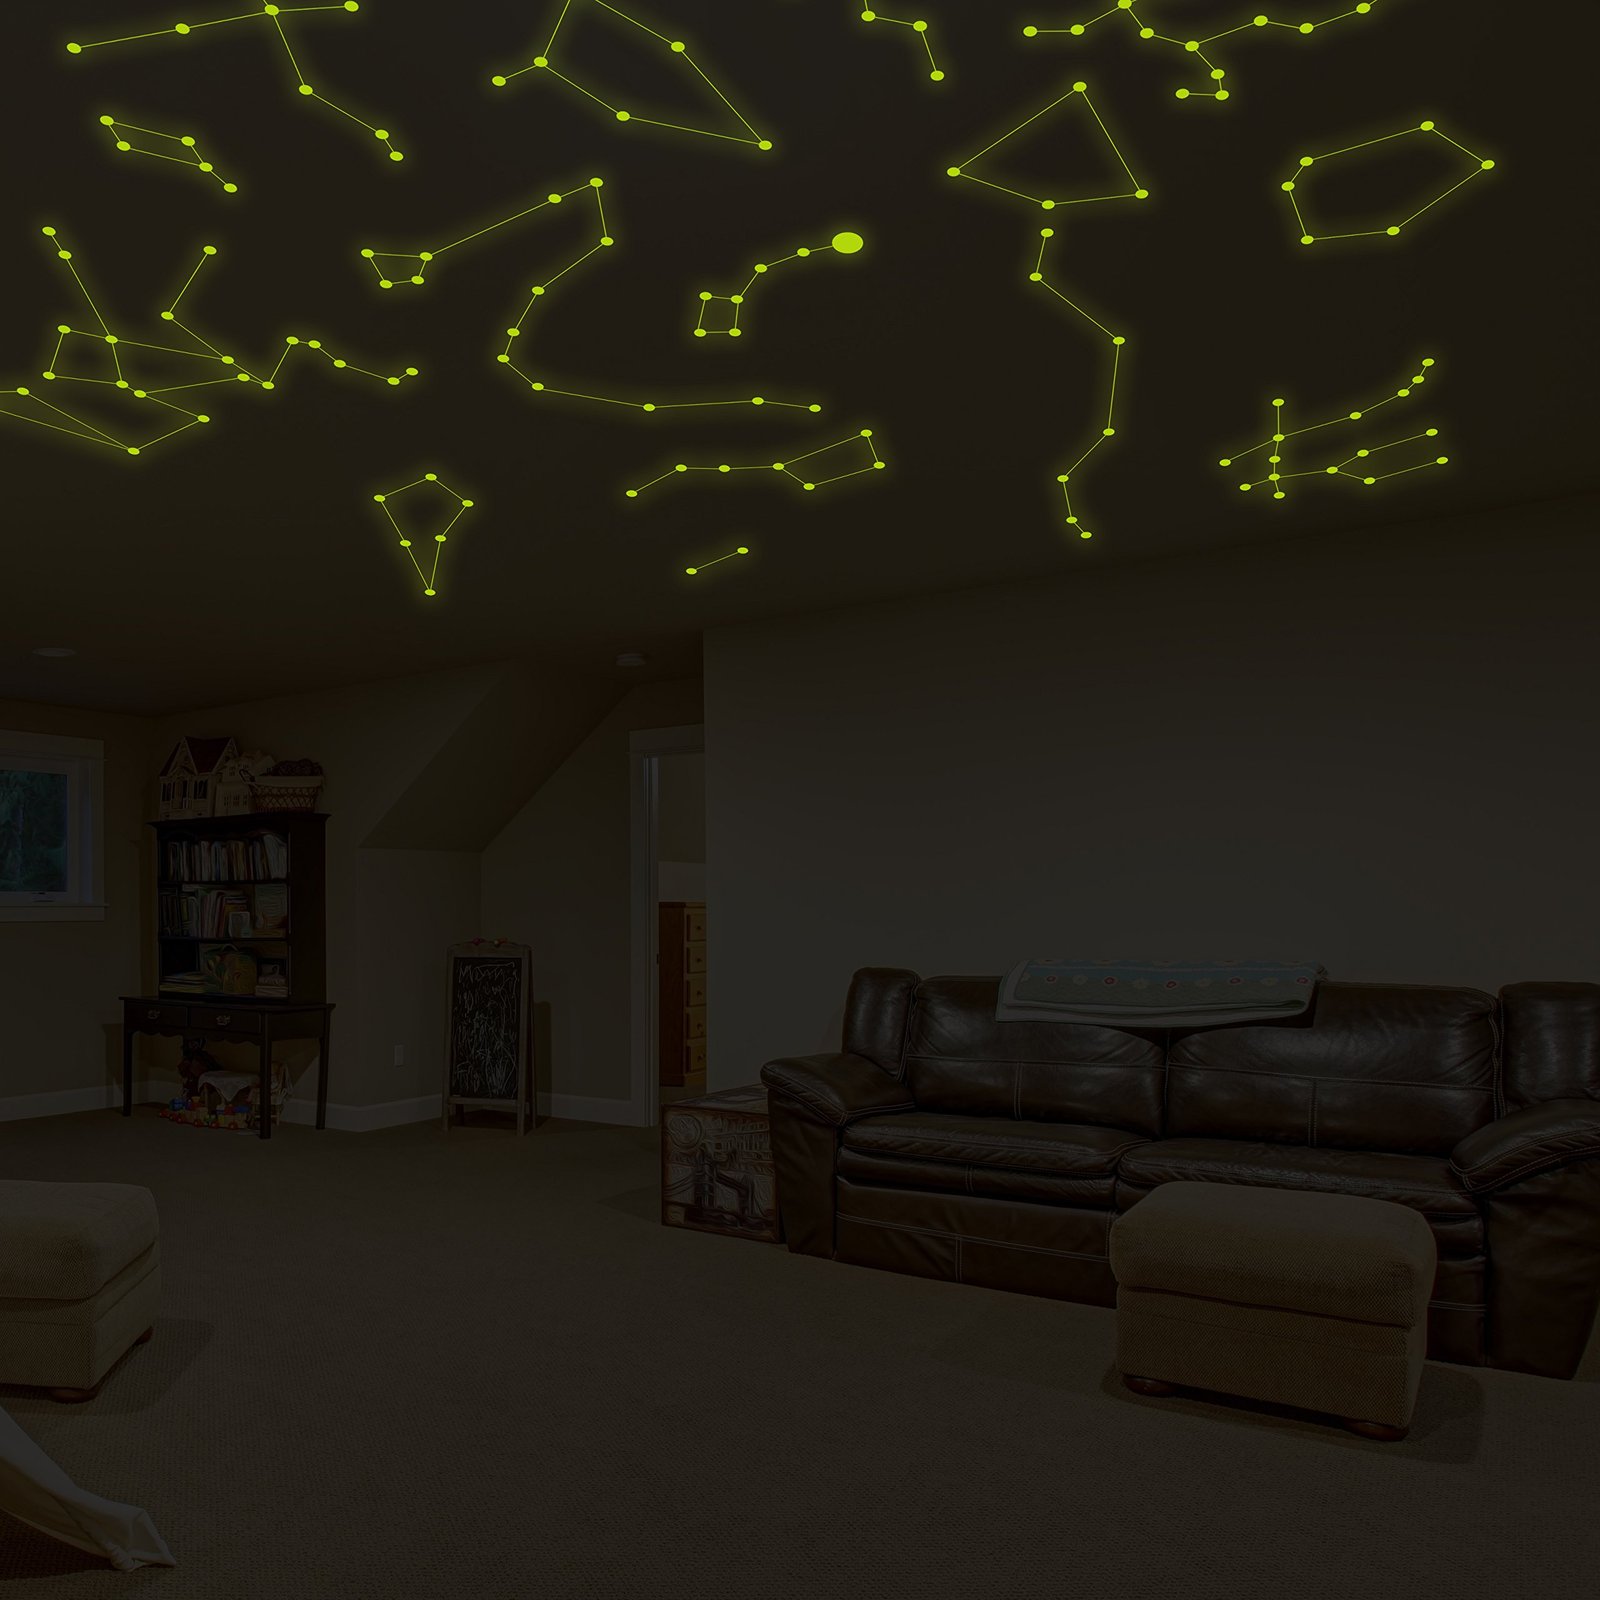 Primary image for ( 217" x 144") Glowing Vinyl Ceiling Decal Star Map with Lines / Glow in the Dar